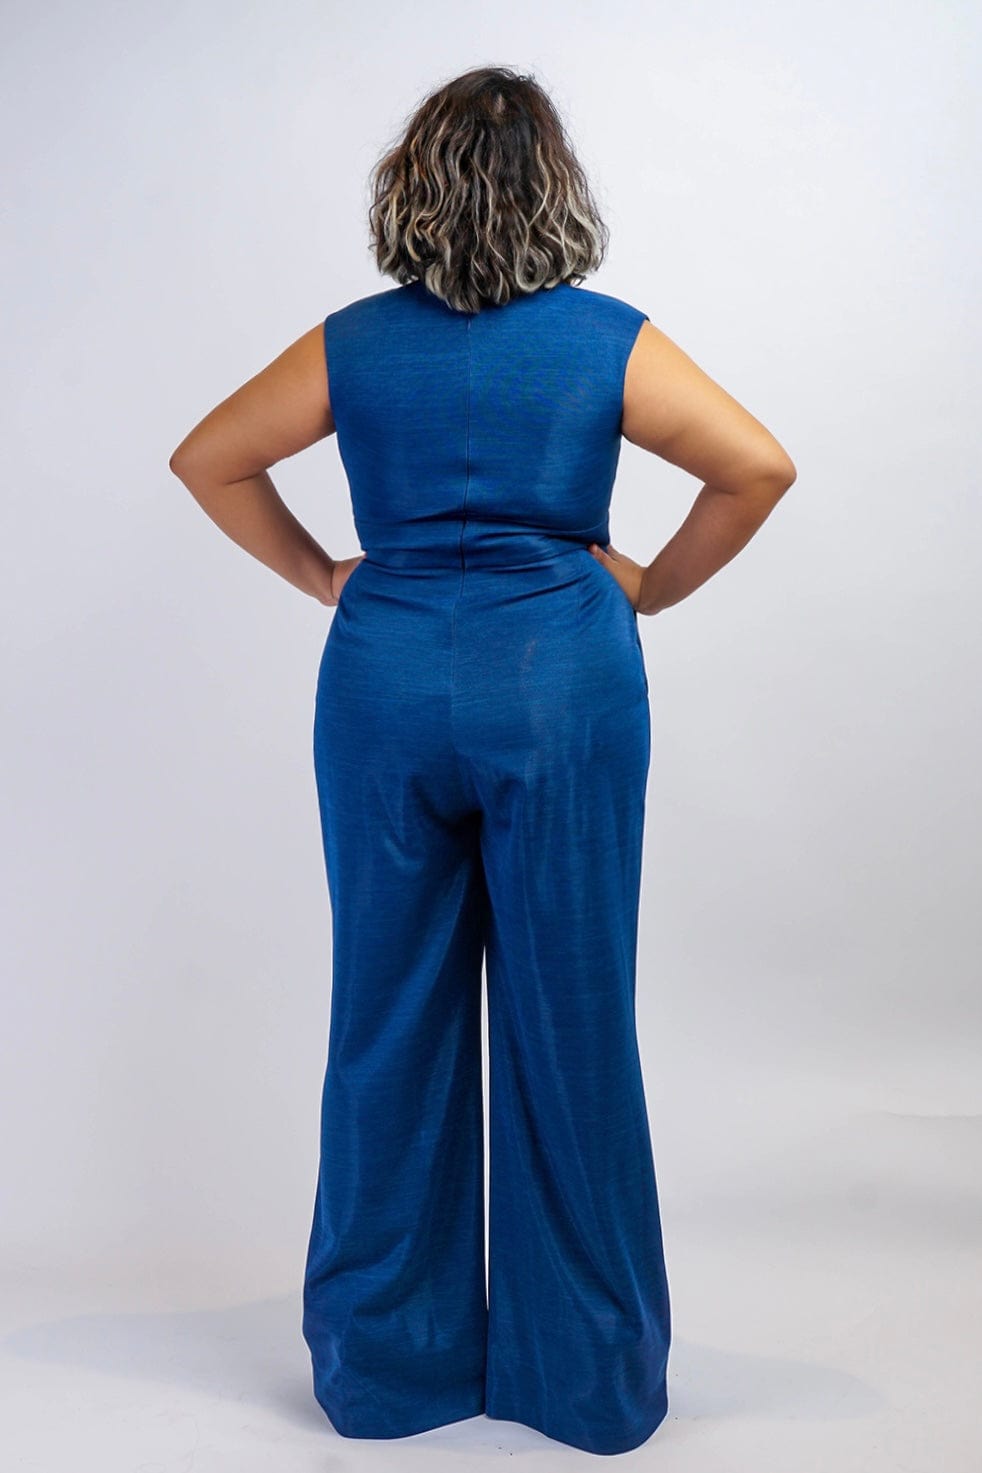 Chloe Dao JUMPSUITS & ROMPERS Sapphire Blue Luxe V Neck Aiden Jumpsuit